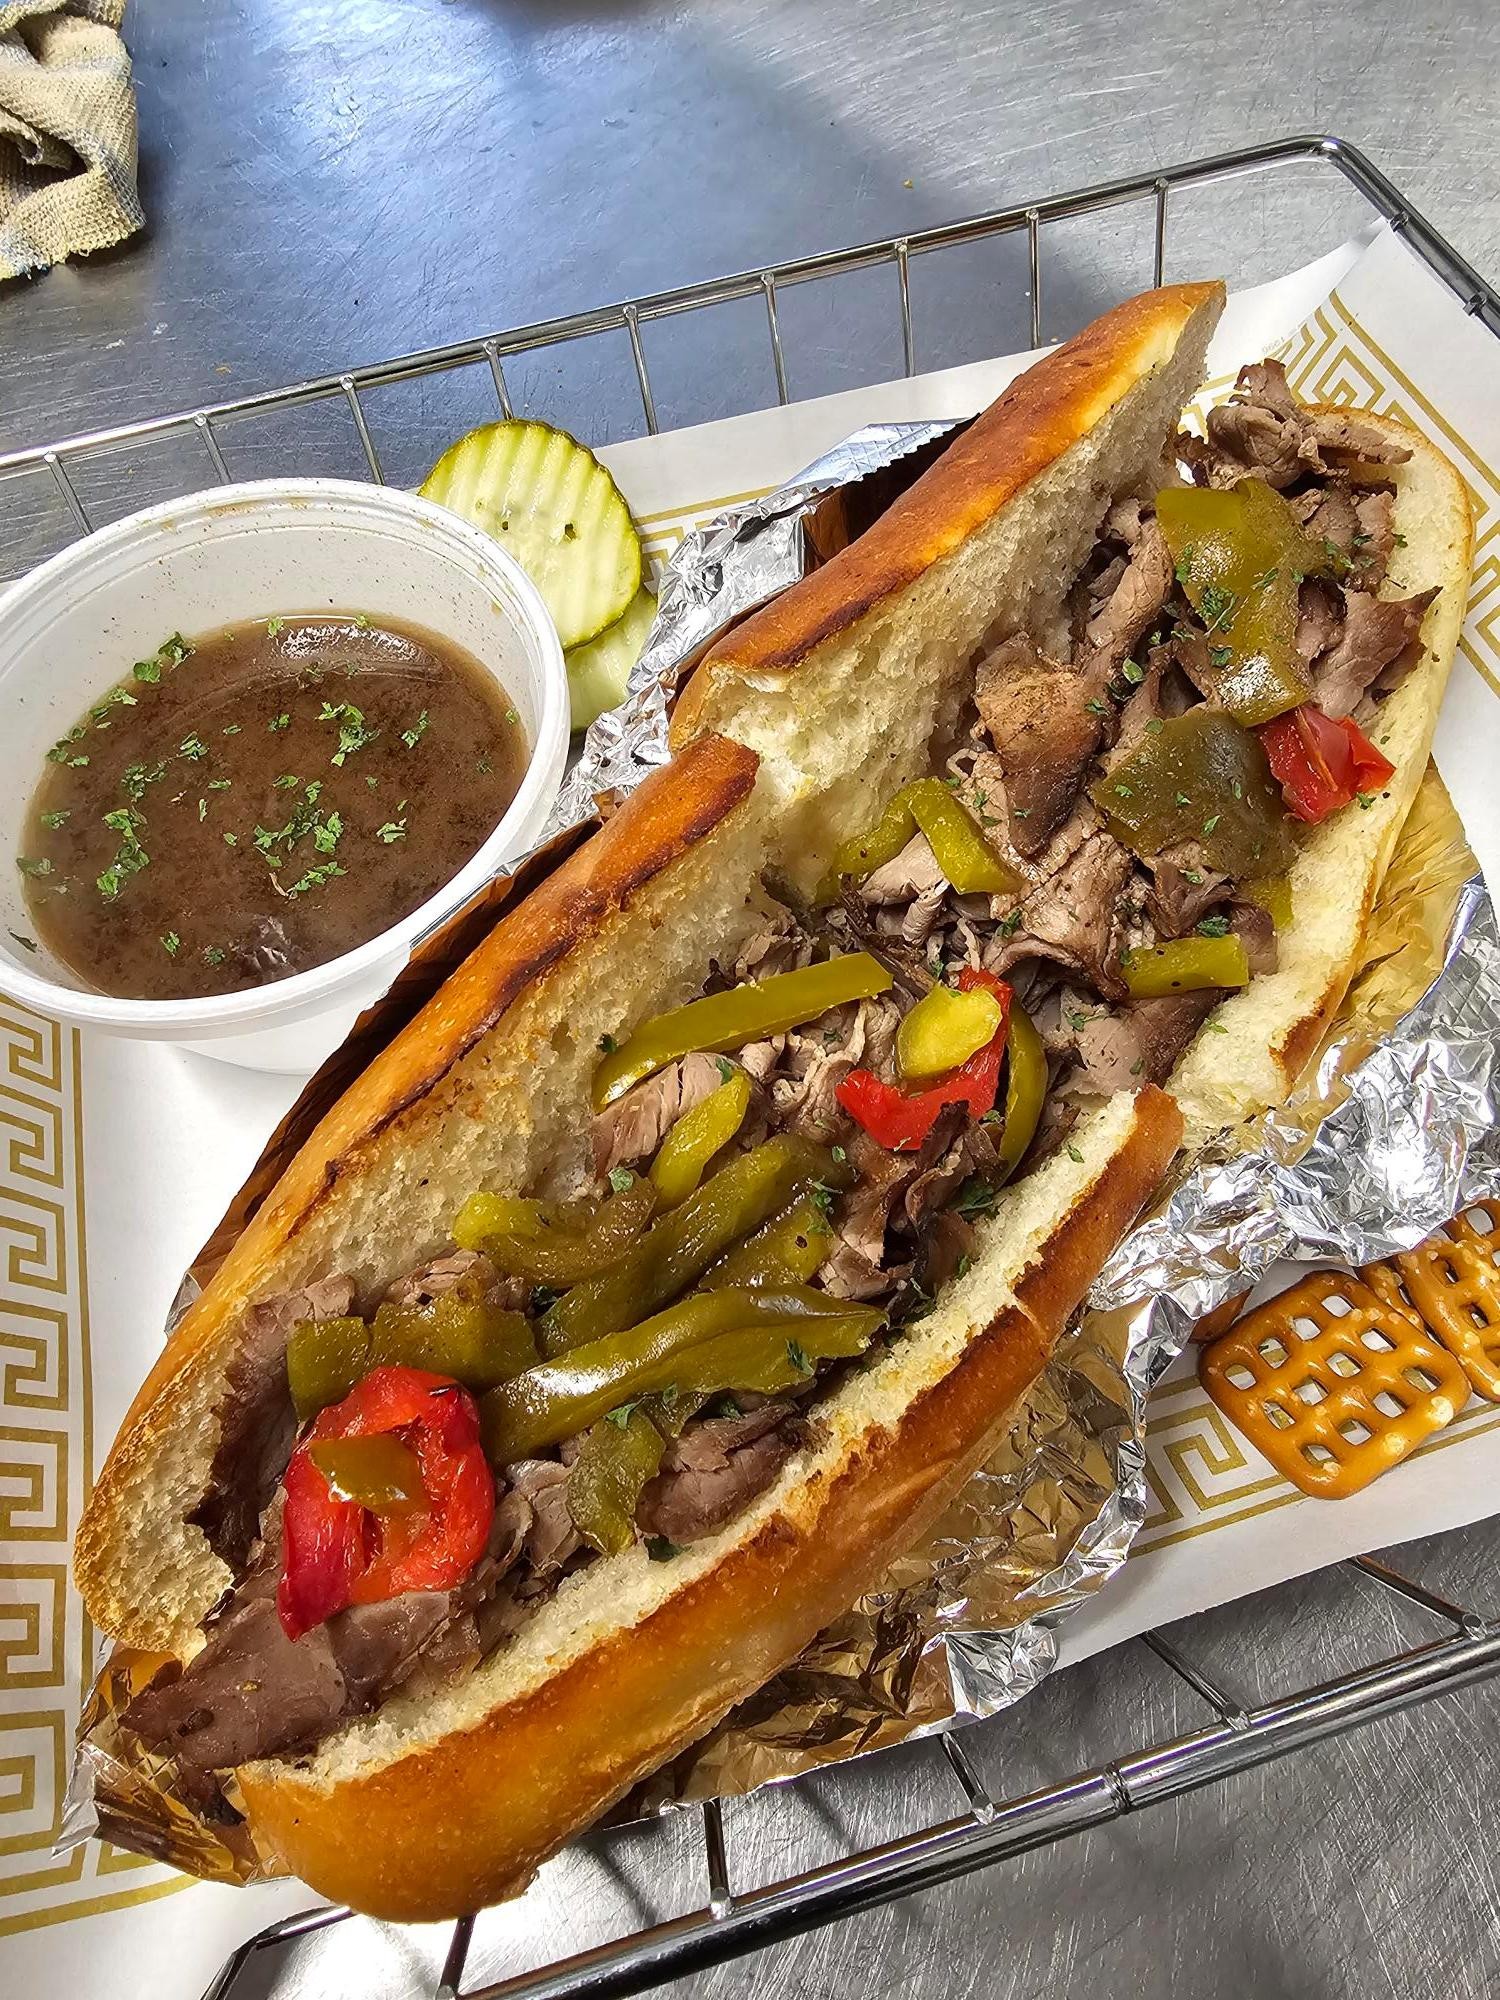 Godfather Driggs Italian Beef and Peppers 12" Grinder